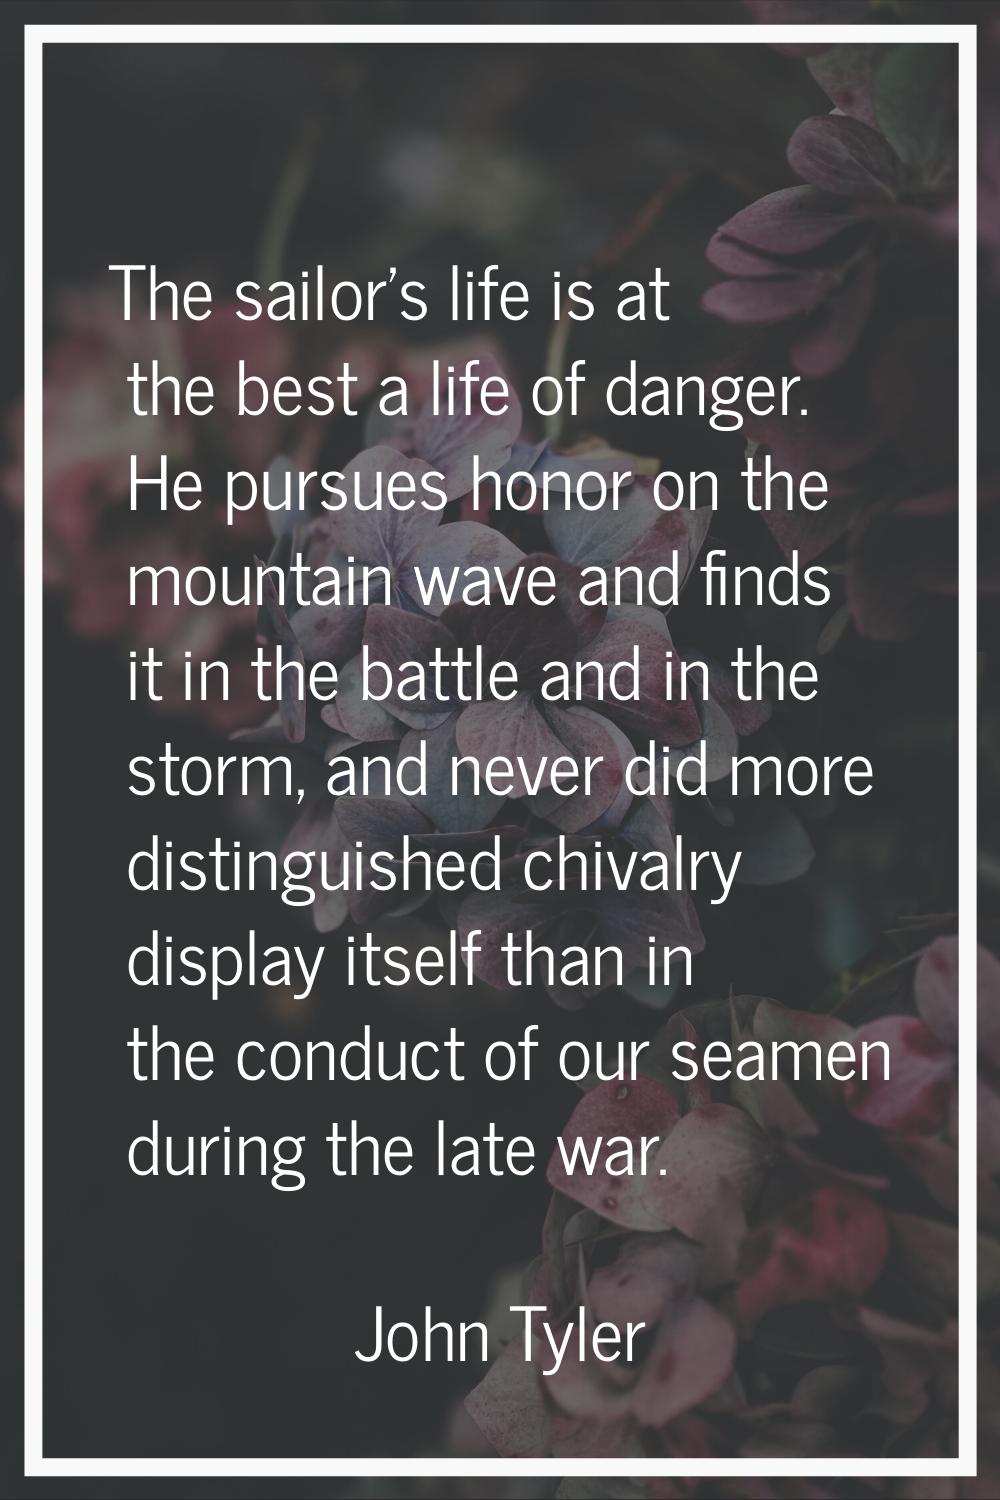 The sailor's life is at the best a life of danger. He pursues honor on the mountain wave and finds 